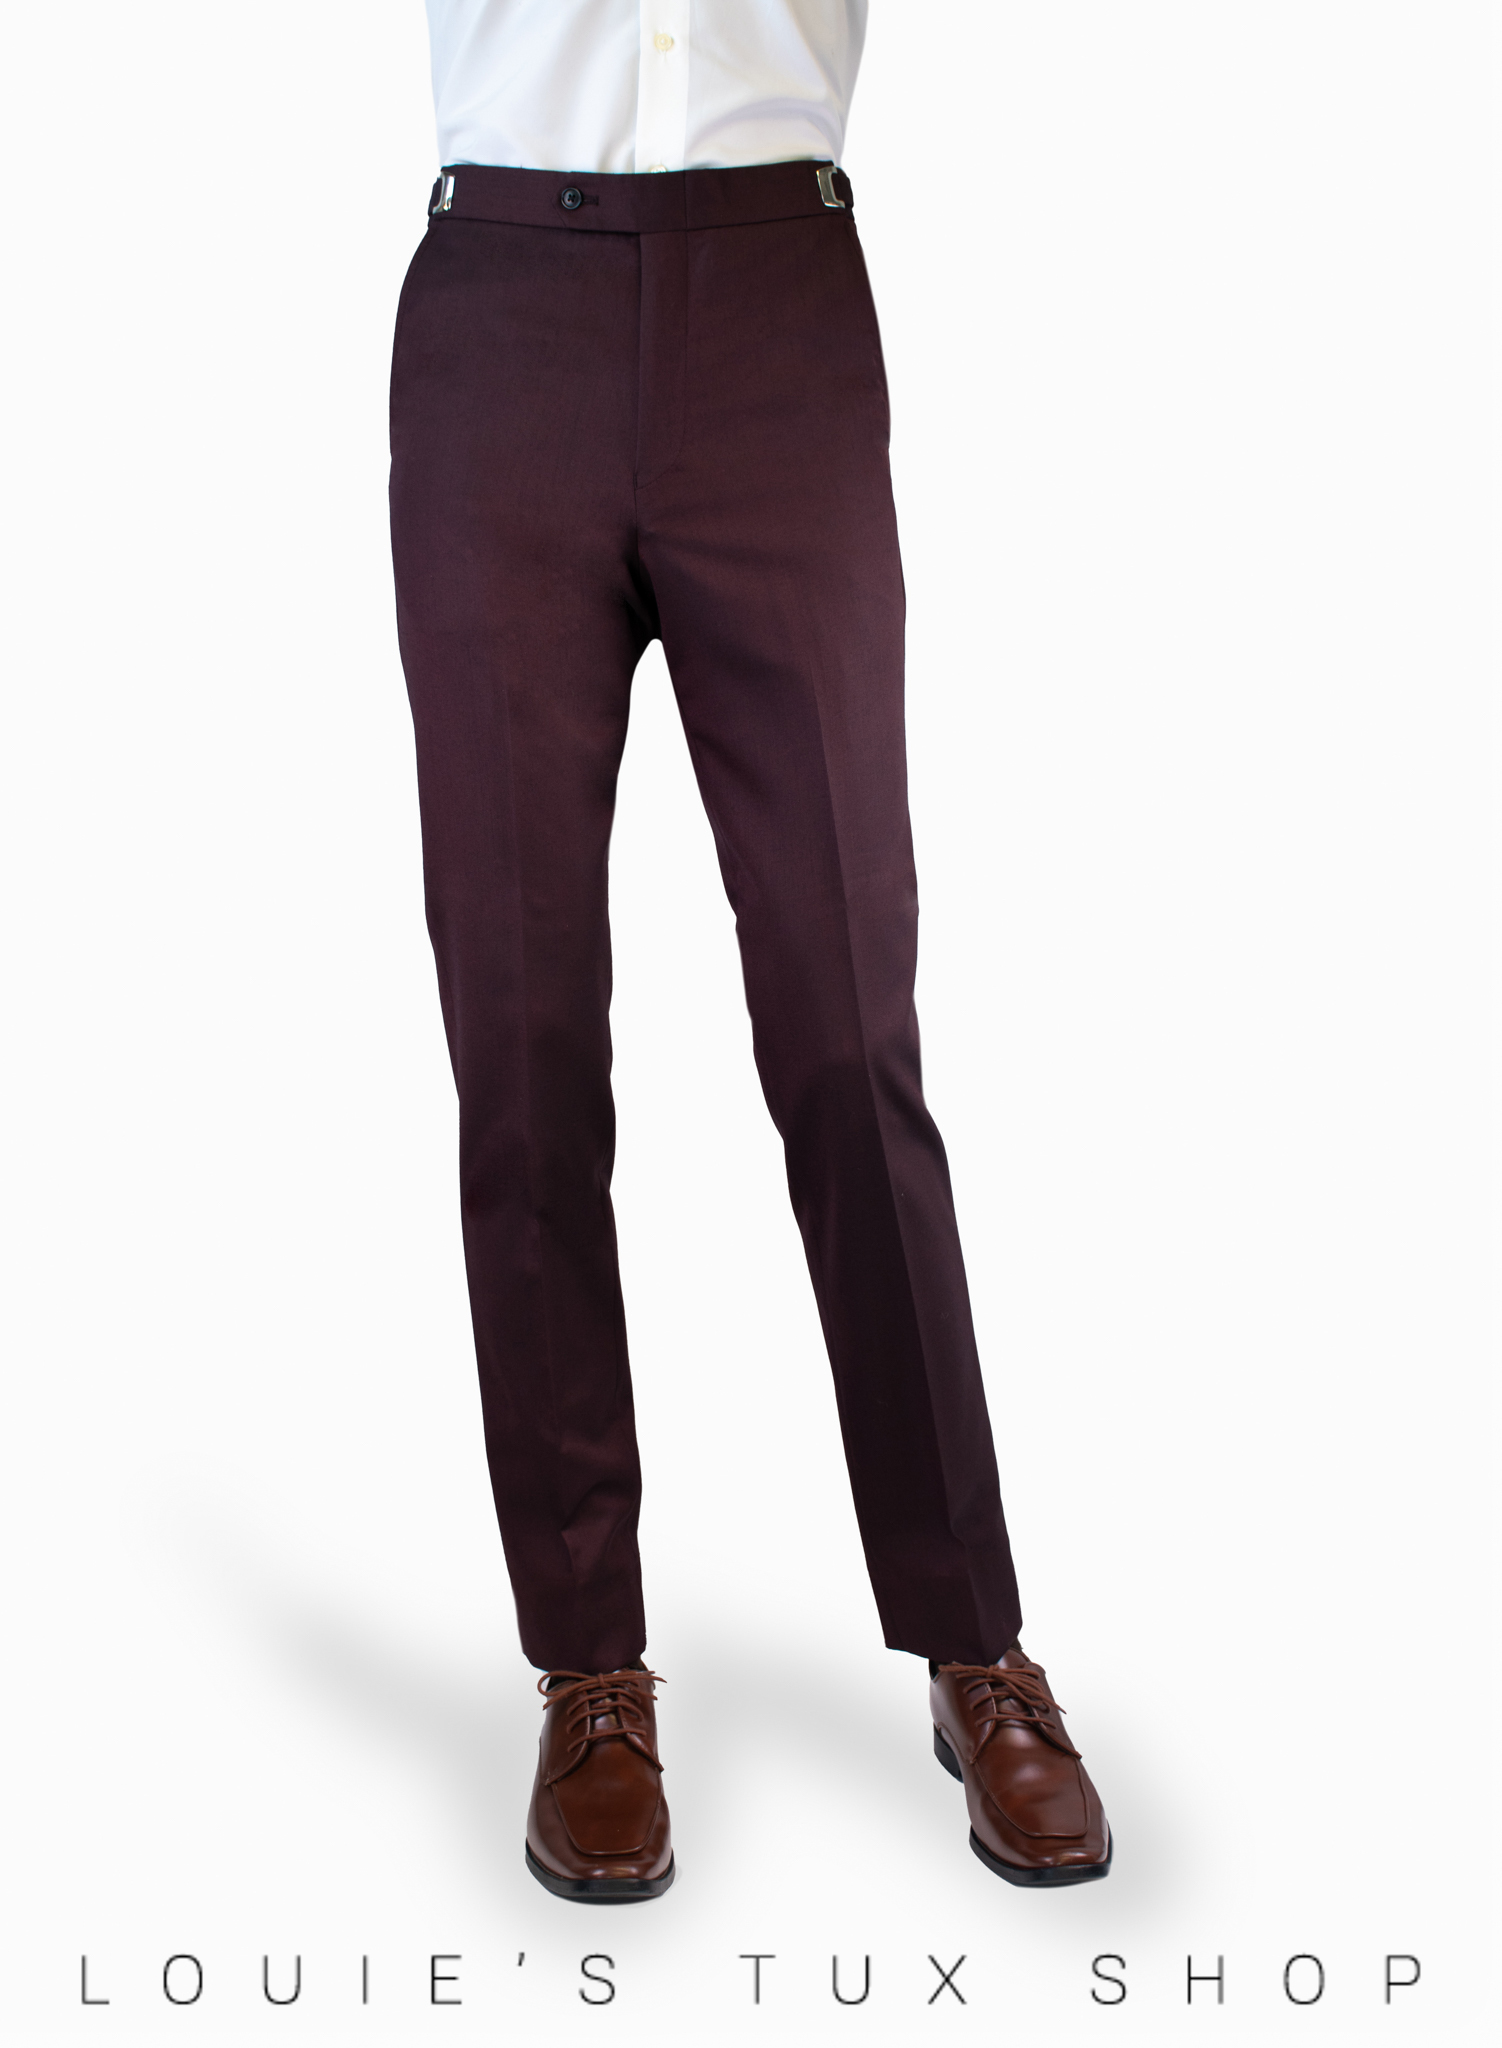 Business Casual Outfit with Grey Pants and Maroon Top - Putting Me Together